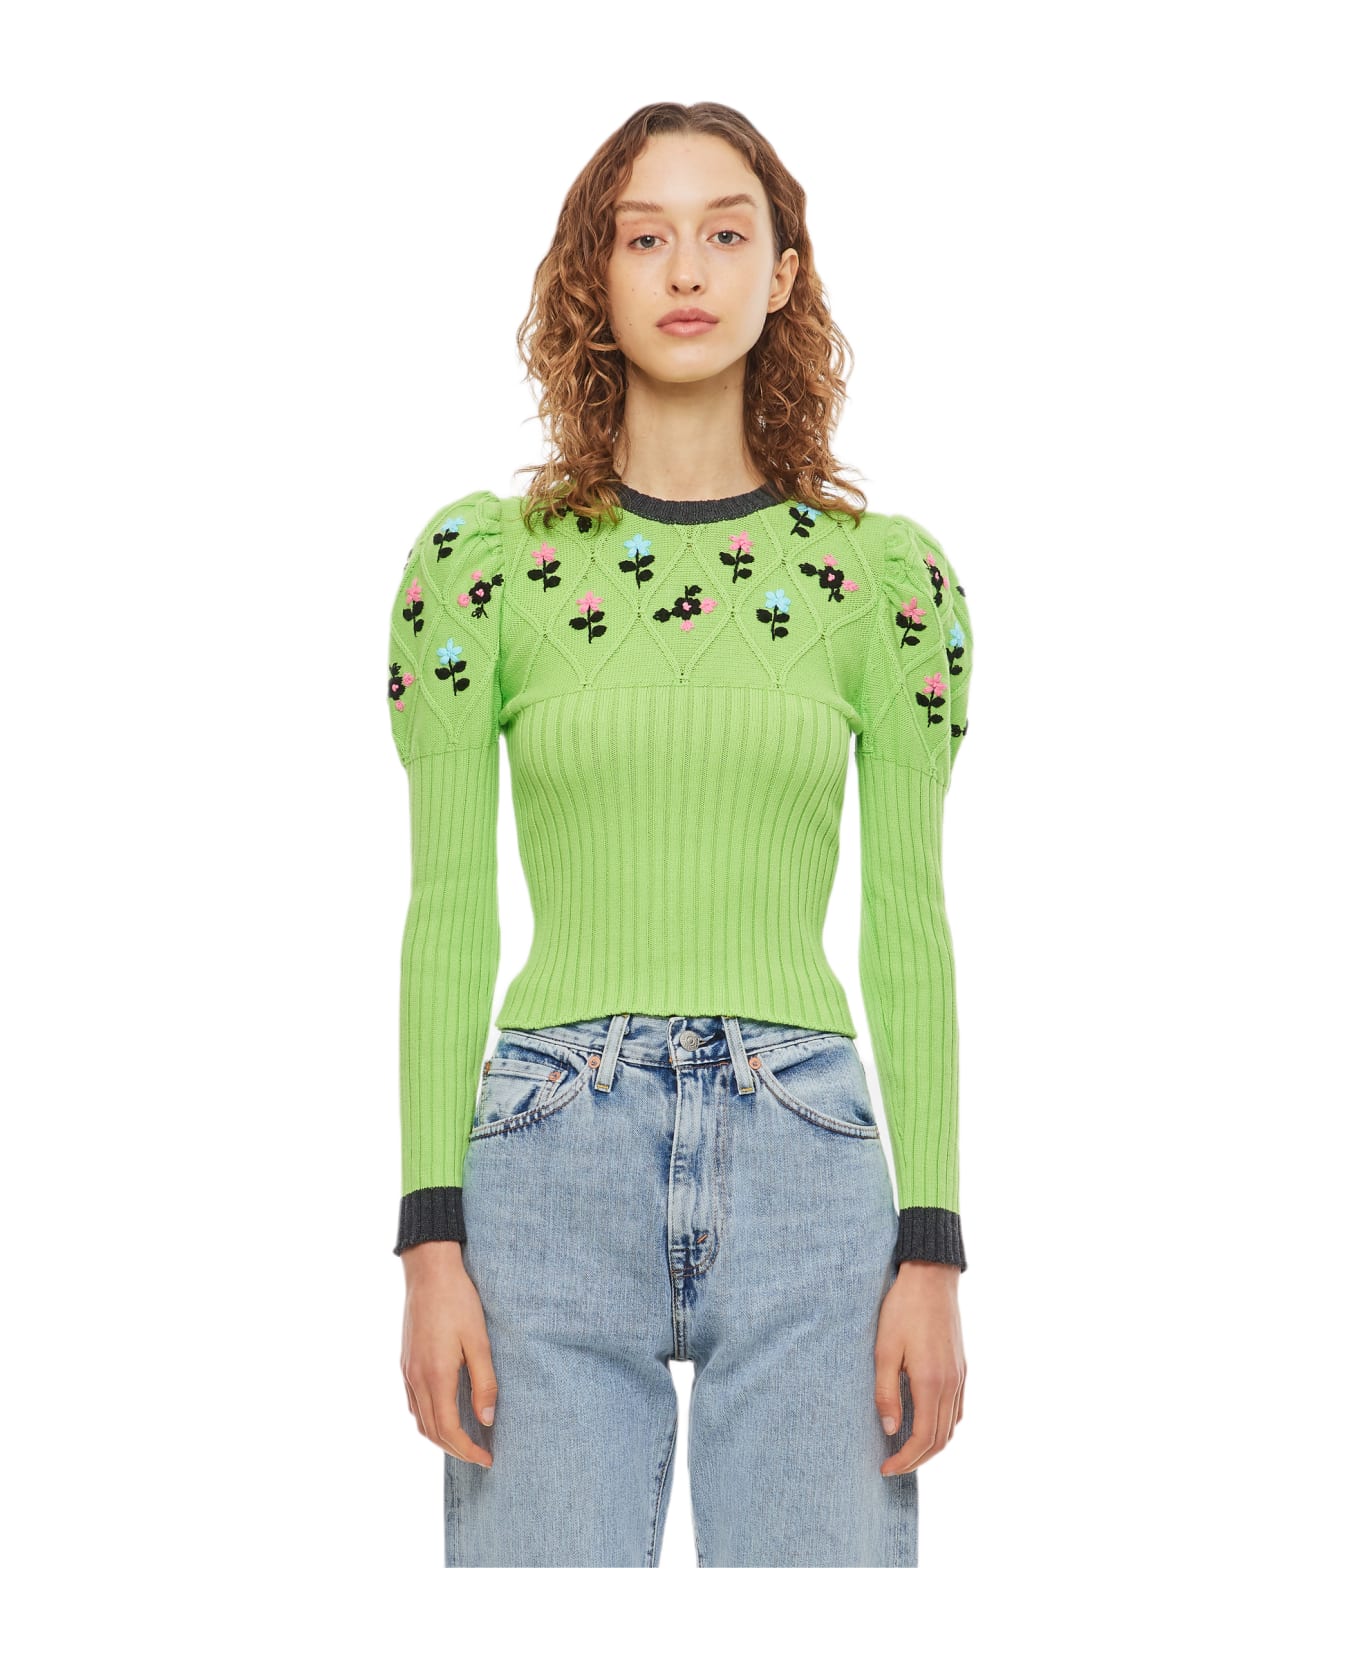 Cormio Oma Cotton Sweater With Embroidery - Green